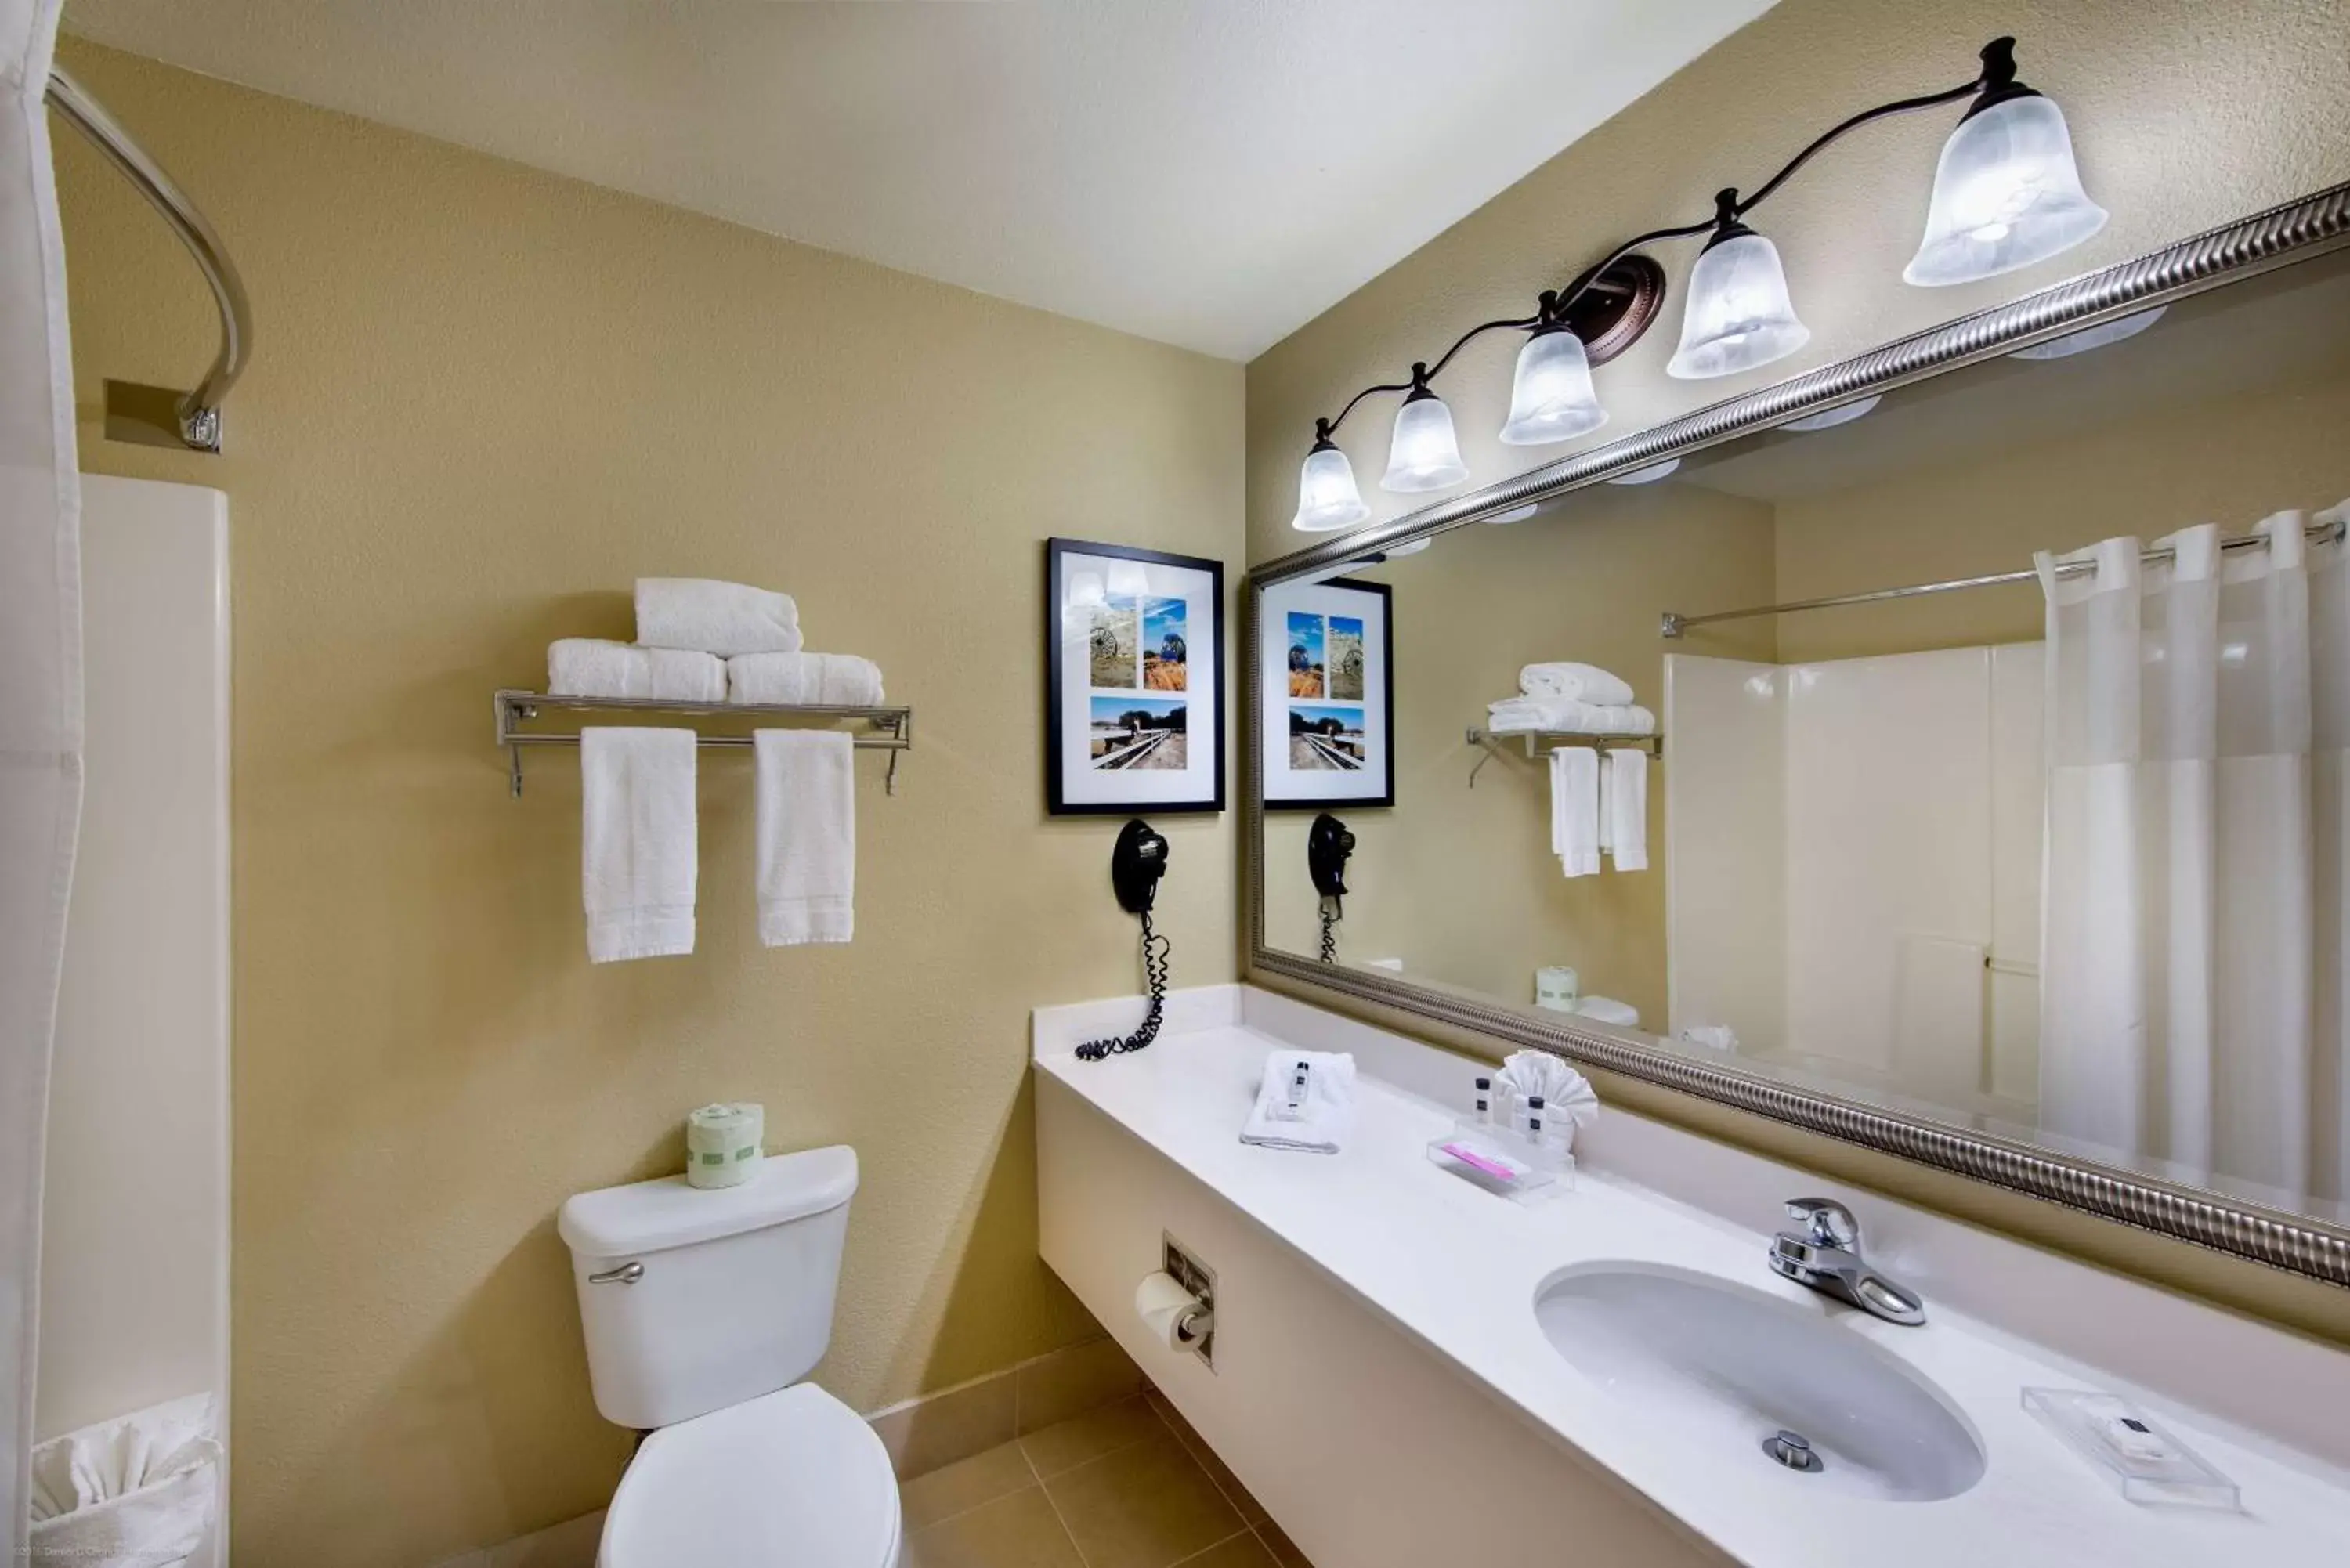 Bathroom in Country Inn & Suites by Radisson, Greeley, CO